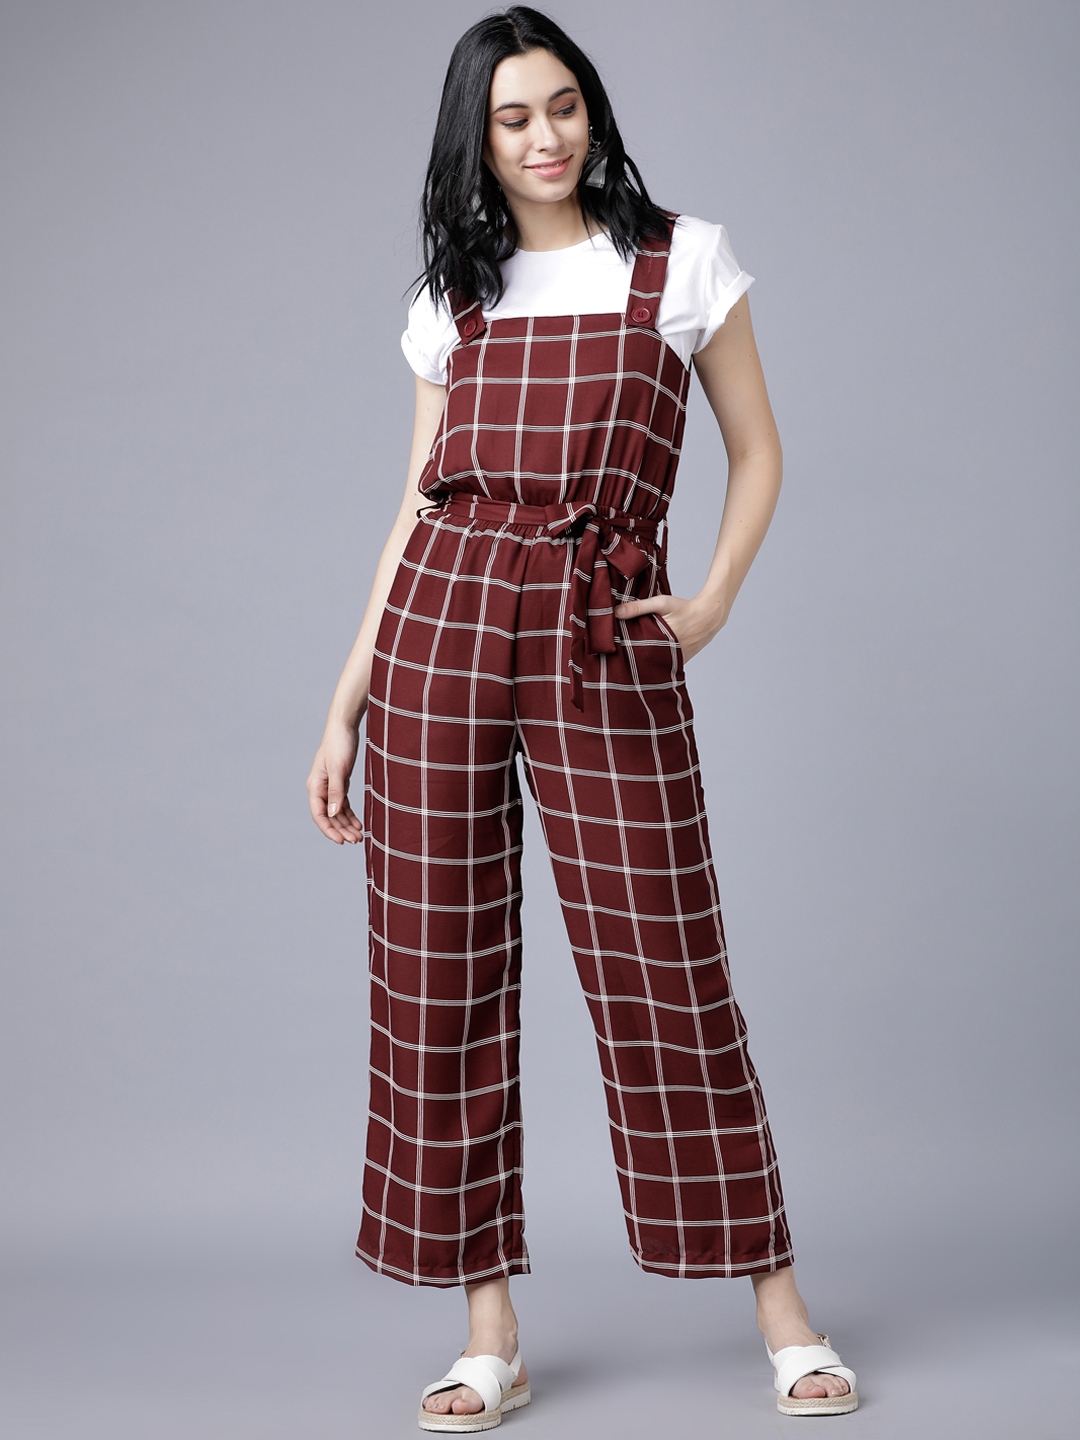 jumpsuit for women on myntra